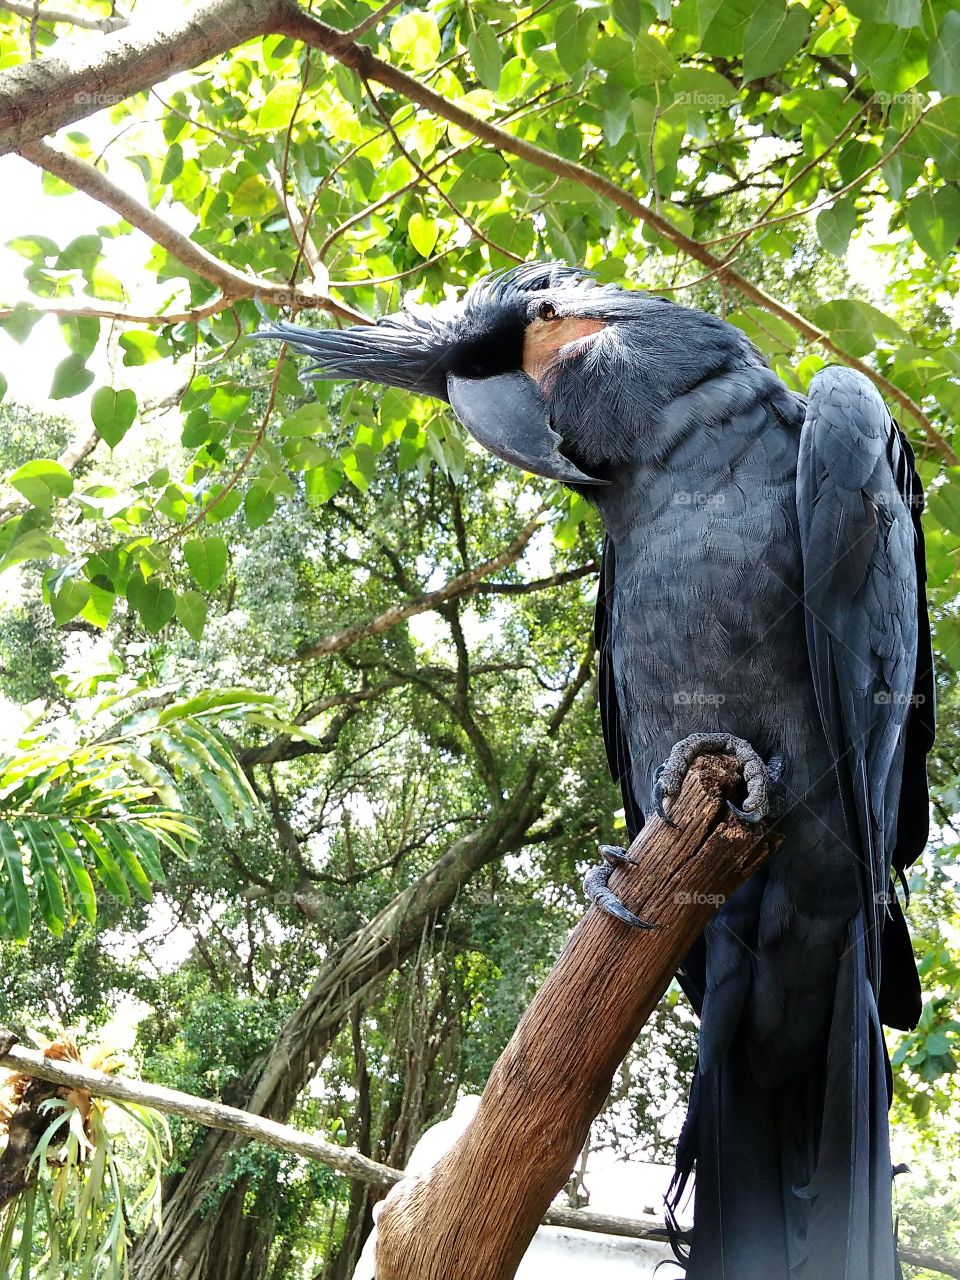 The parrots of indigenous kings of indonesia